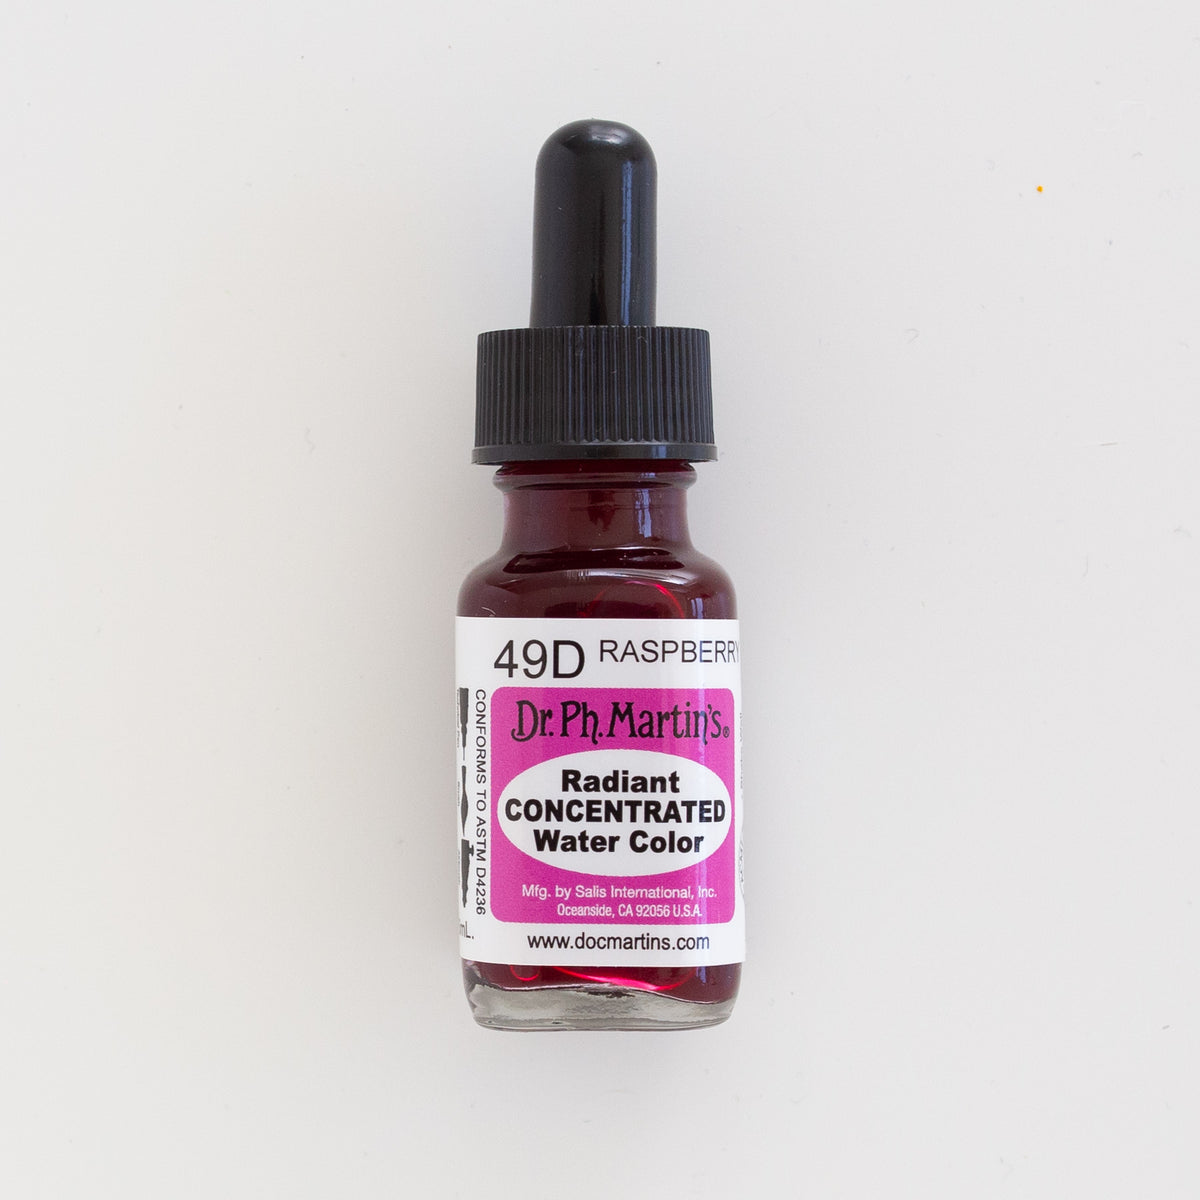 Dr. Ph. Martin’s Radiant Concentrated 49D Raspberry